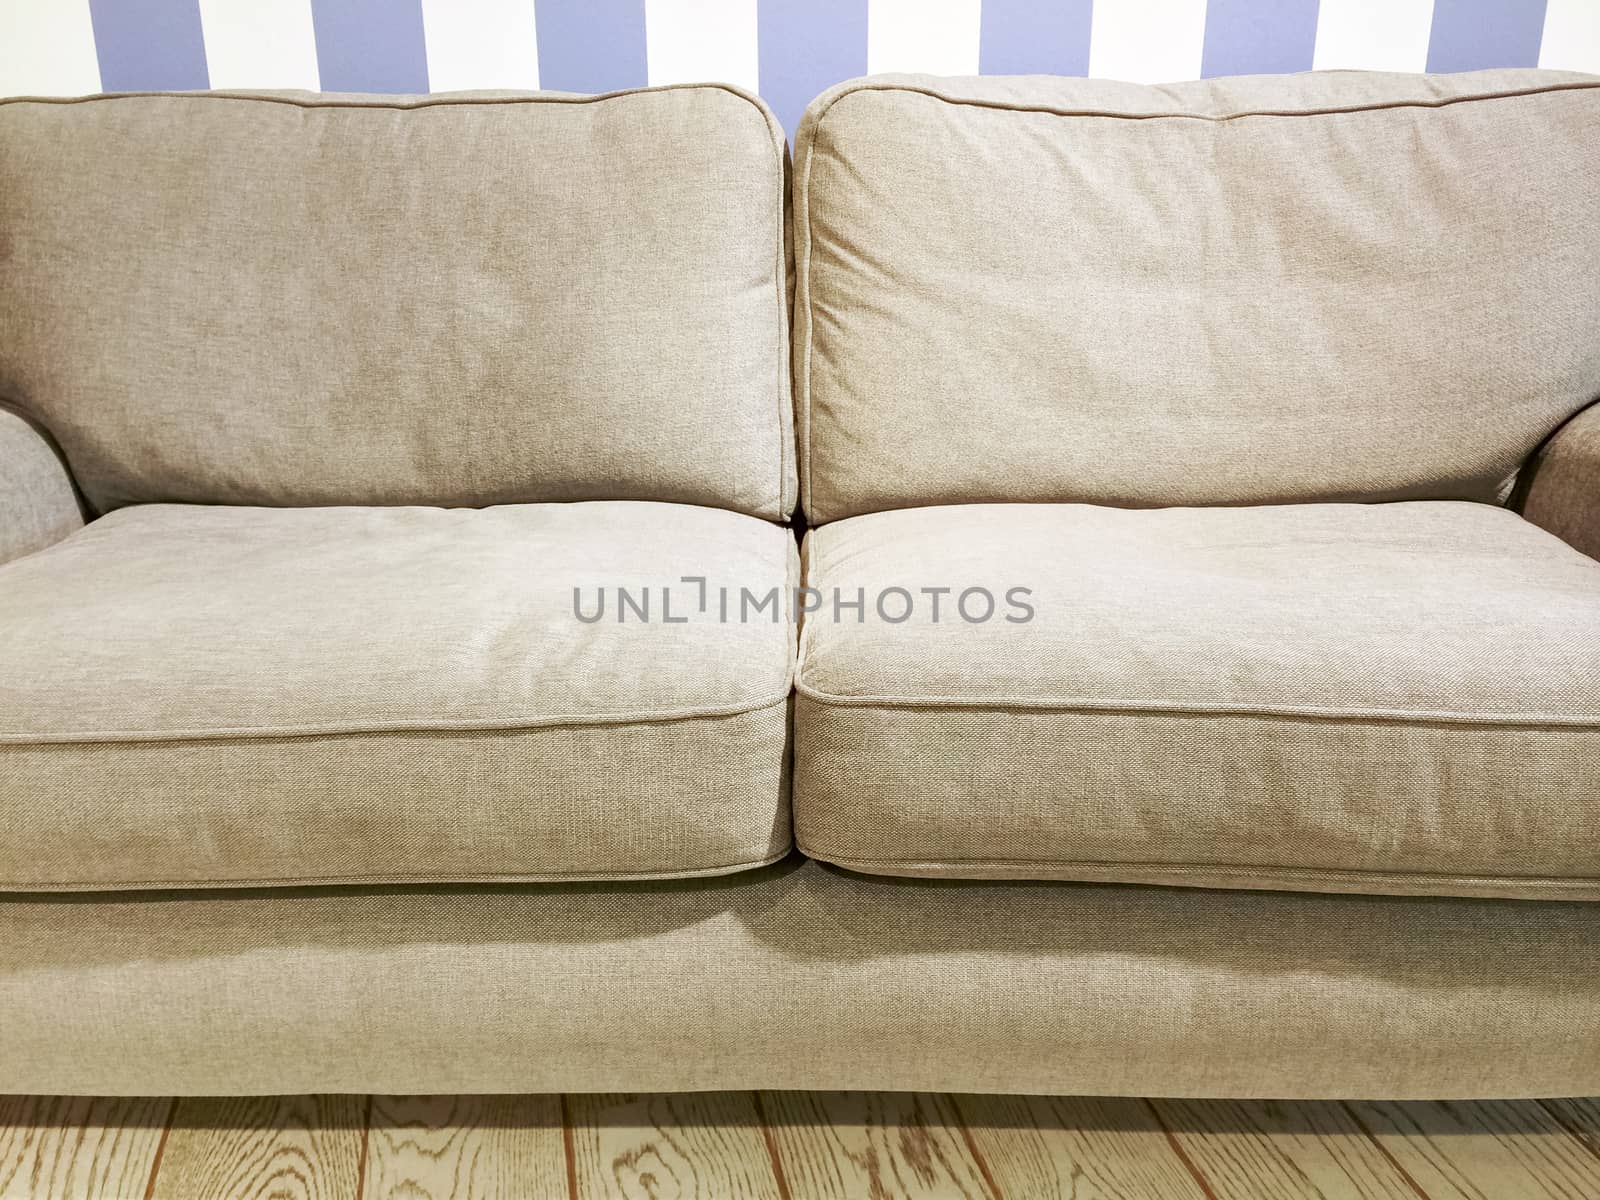 Soft beige sofa near the wall with striped wallpaper. Comfortable furniture.